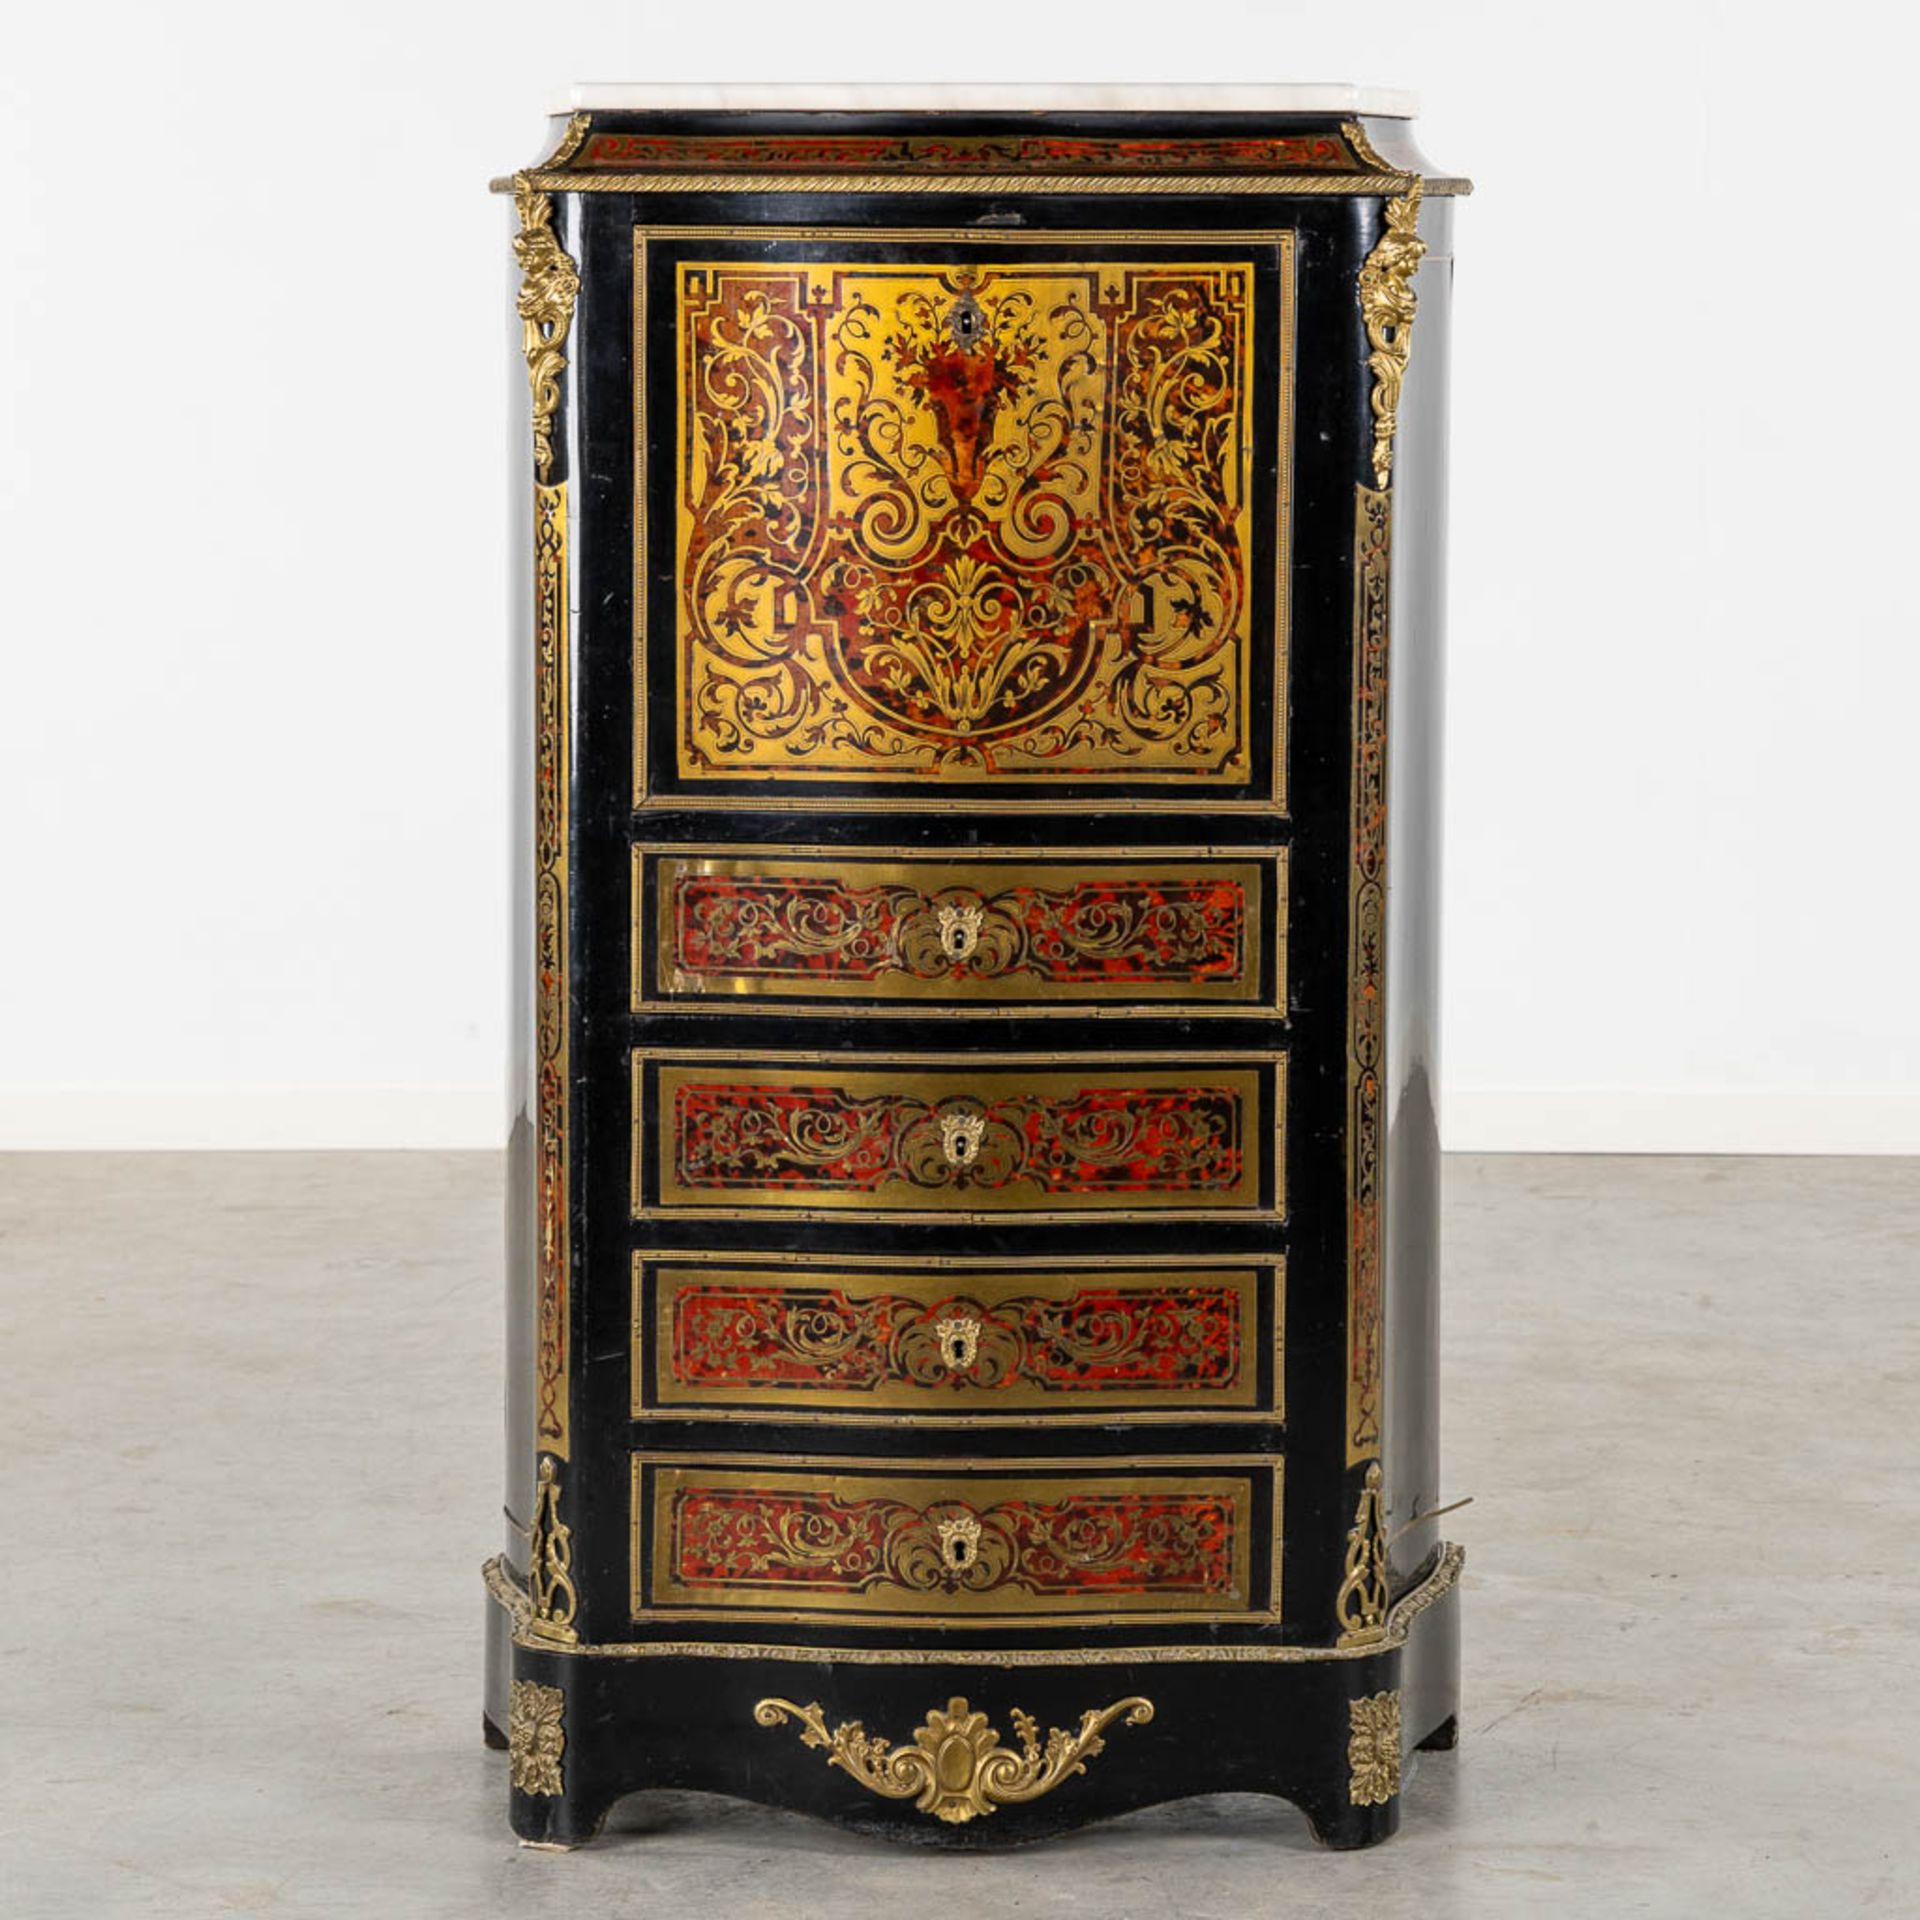 A Boulle inlay secretaire cabinet, Napoleon 3 period, 19th C. (L:36 x W:75 x H:122 cm) - Image 4 of 18